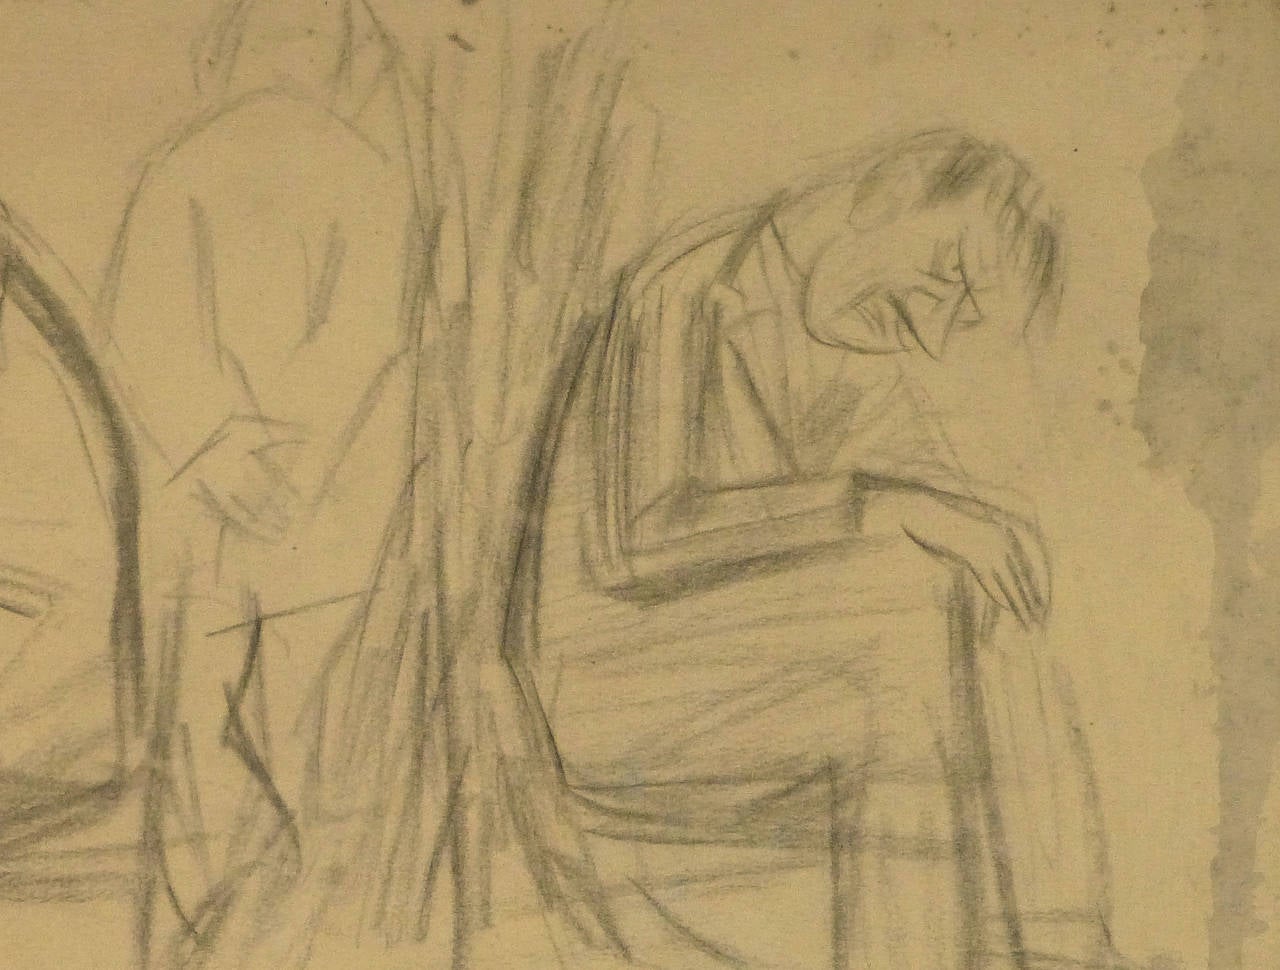 Vintage Charcoal Sketch - Sitting & Reclining - Brown Figurative Art by Unknown